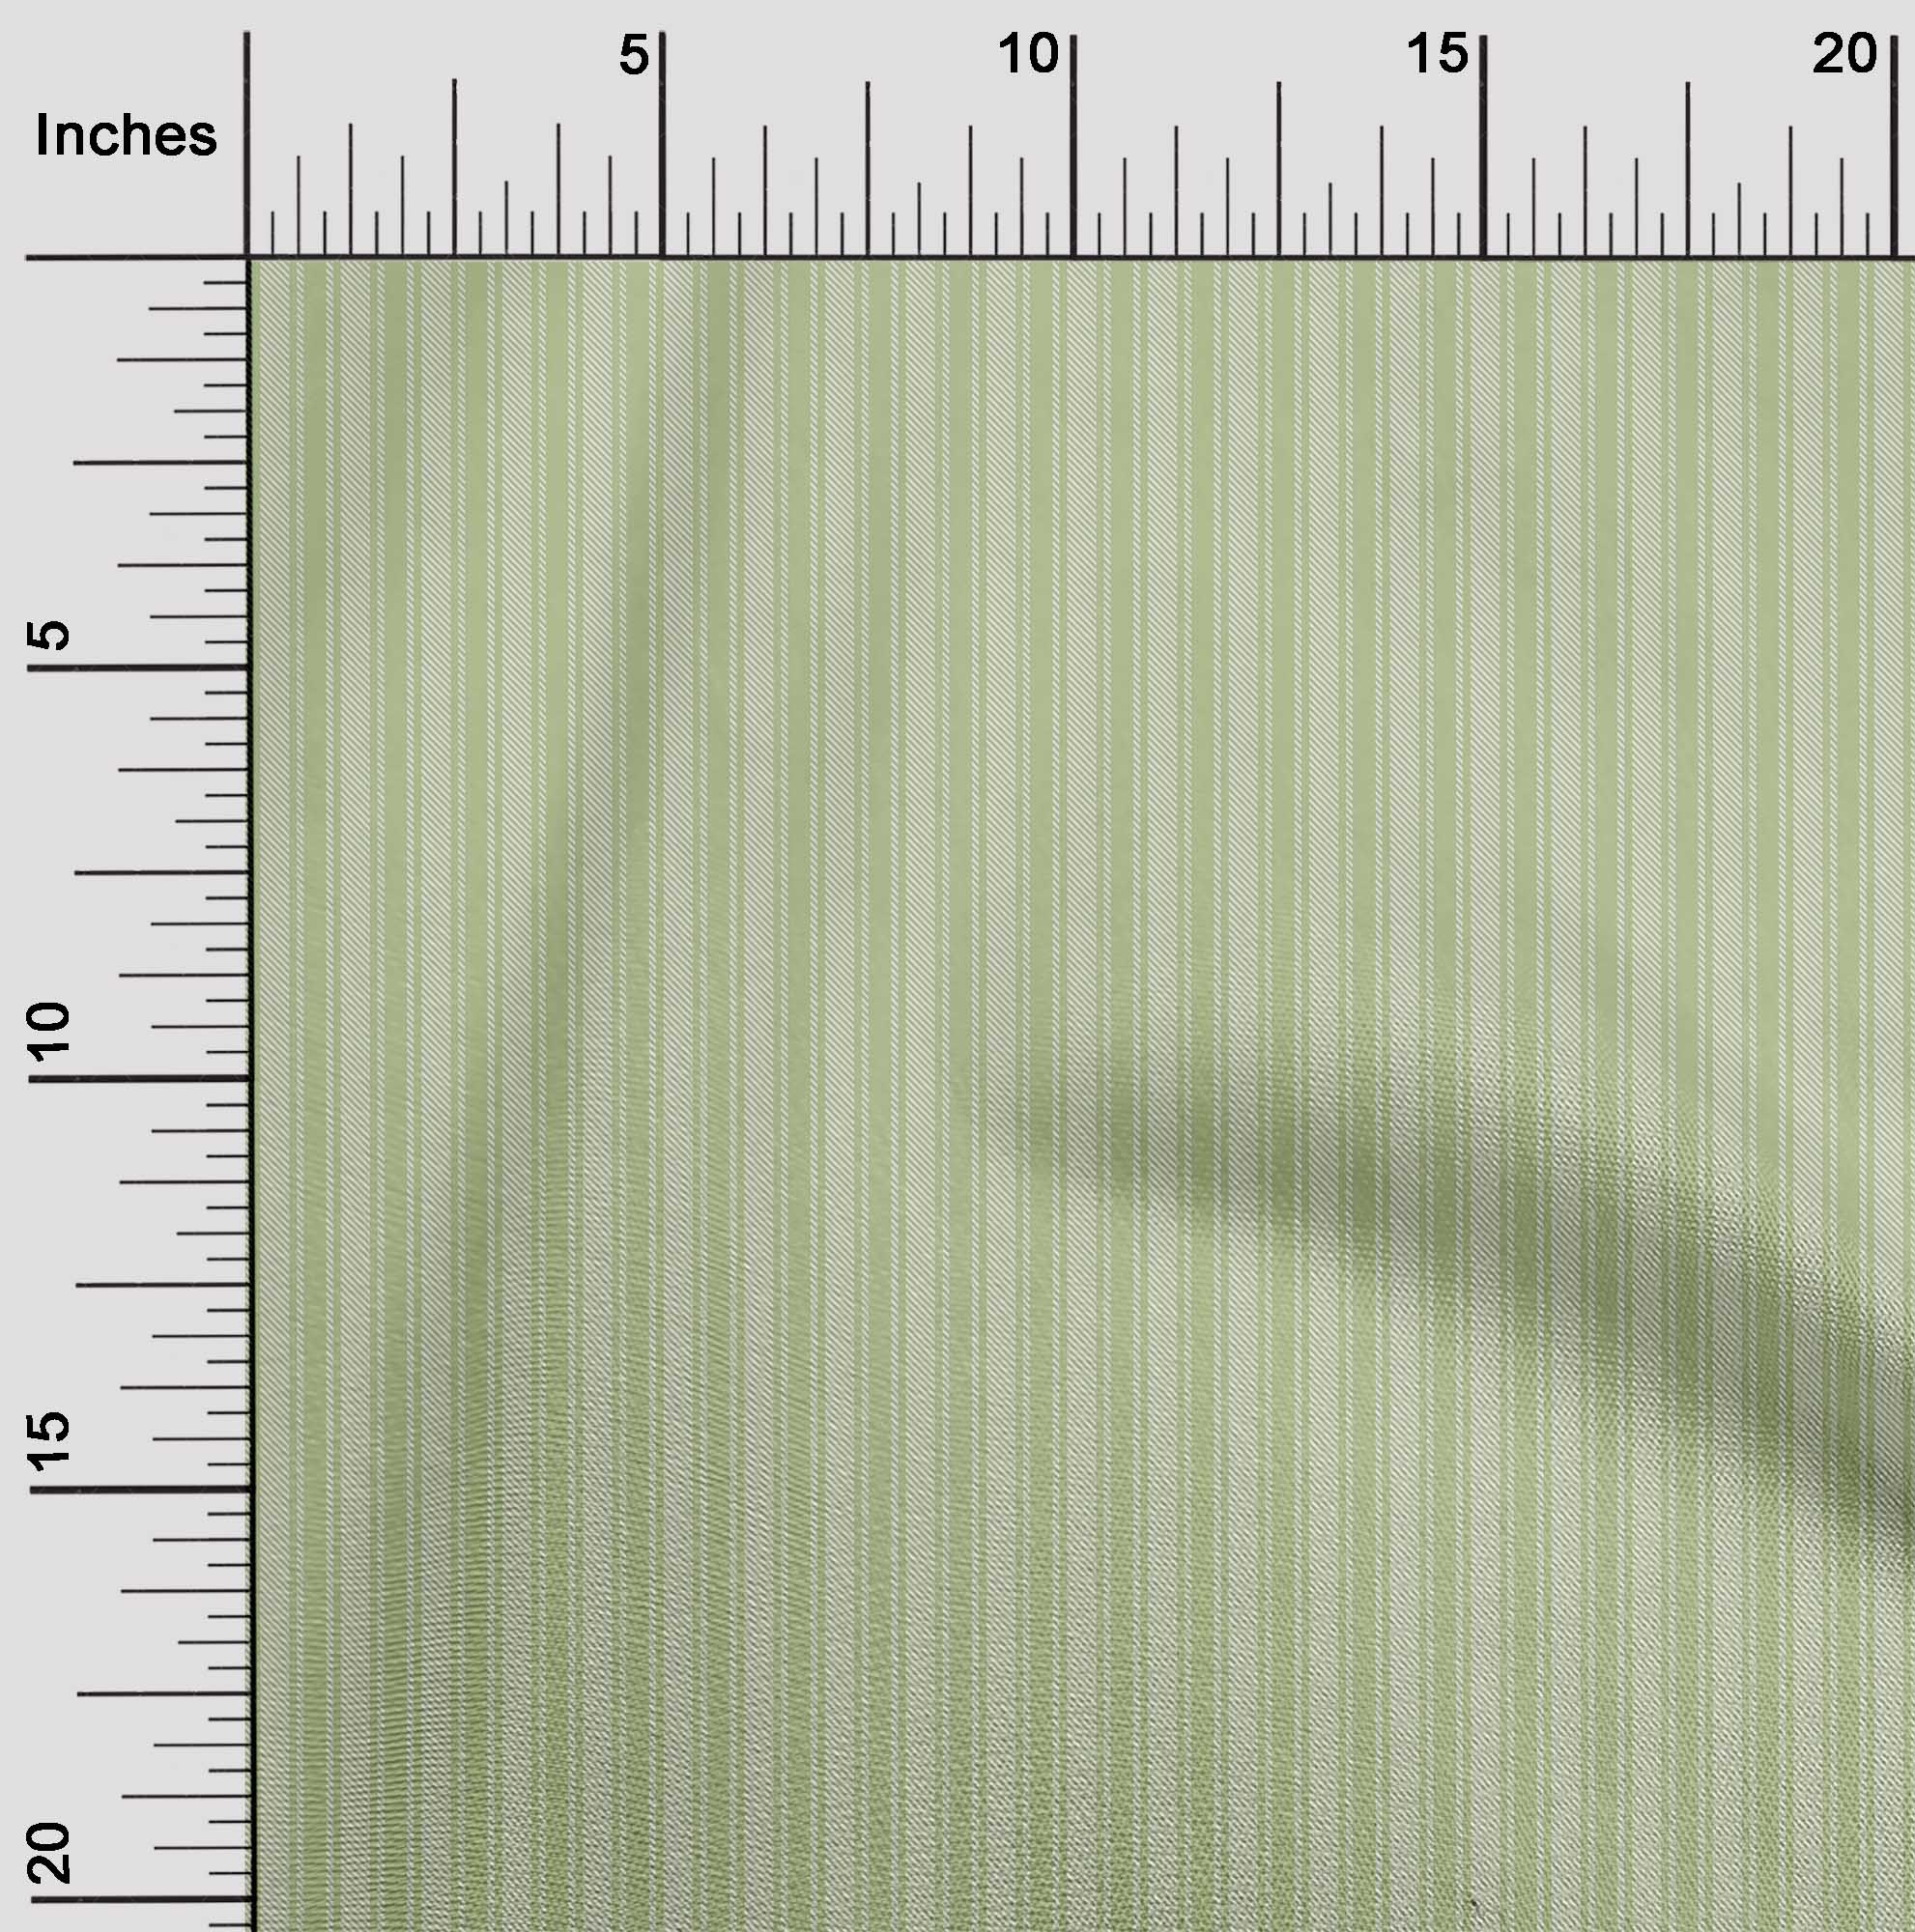 oneOone Organic Cotton Voile Fabric Diagonal Line  Stripe Decor Fabric  Printed BTY 42 Inch Wide